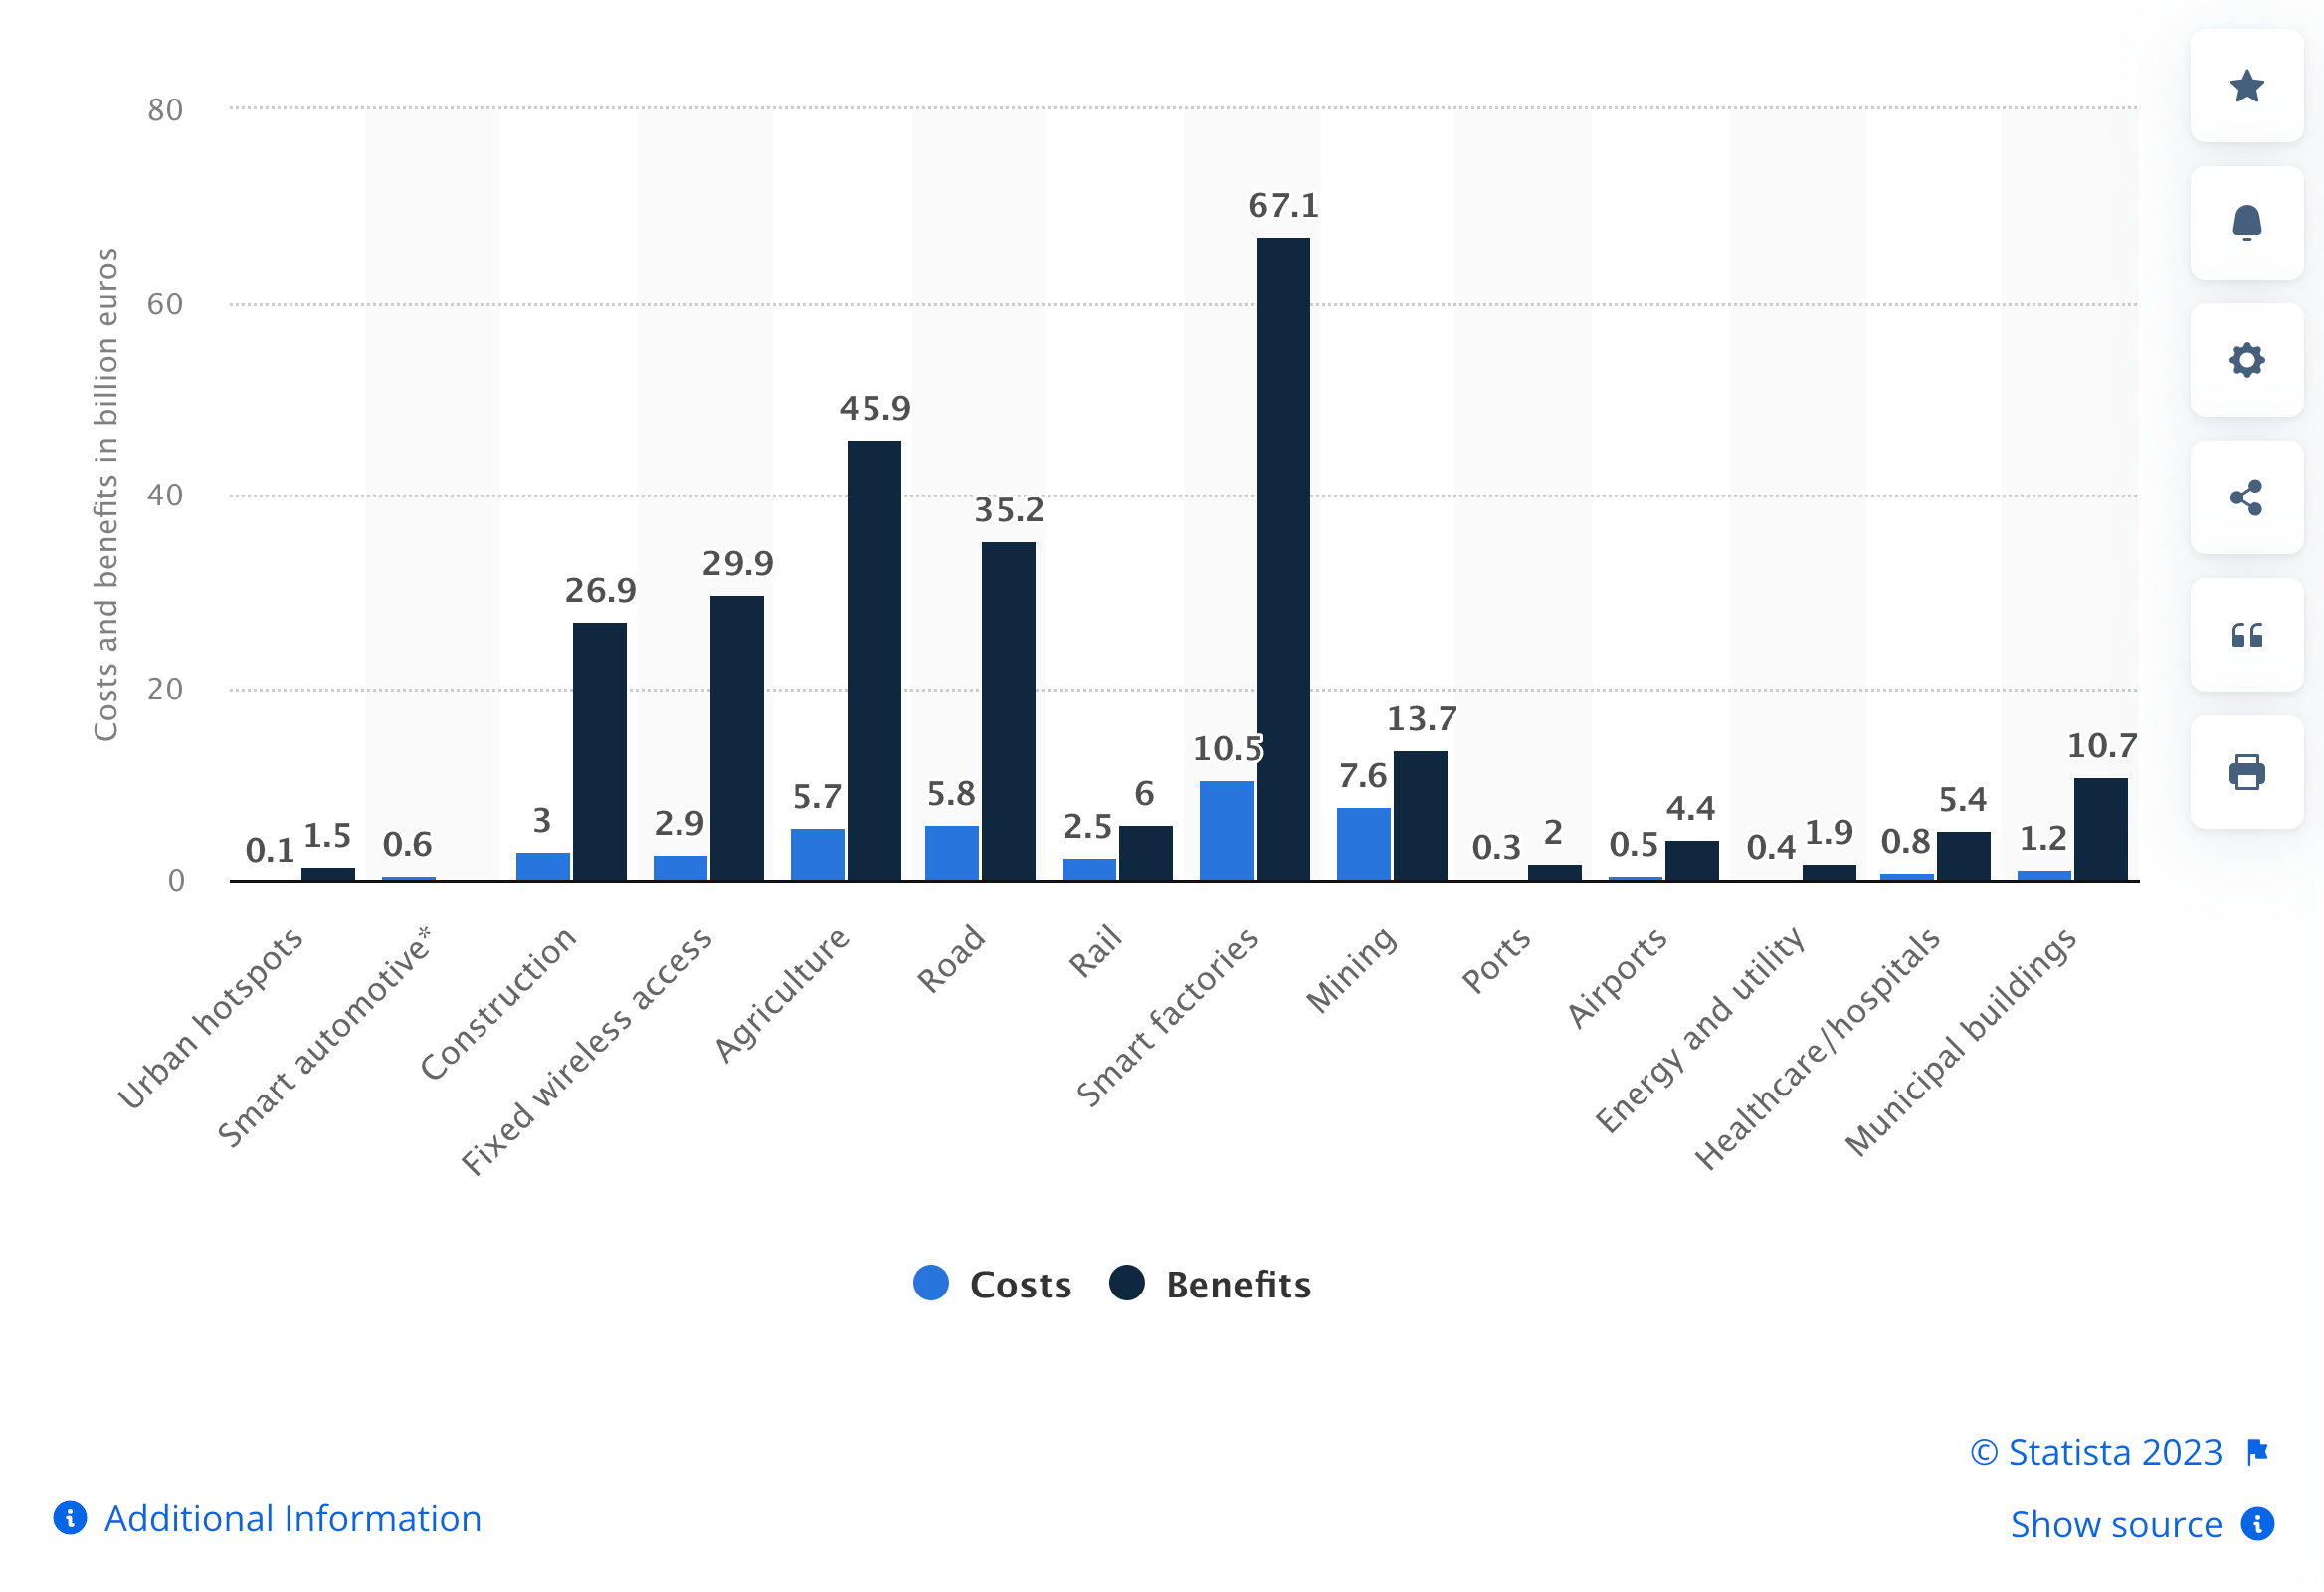 Figure 1: benefits and costs of full 5G deployments across use cases in Europe (per € billion). Source: Statista